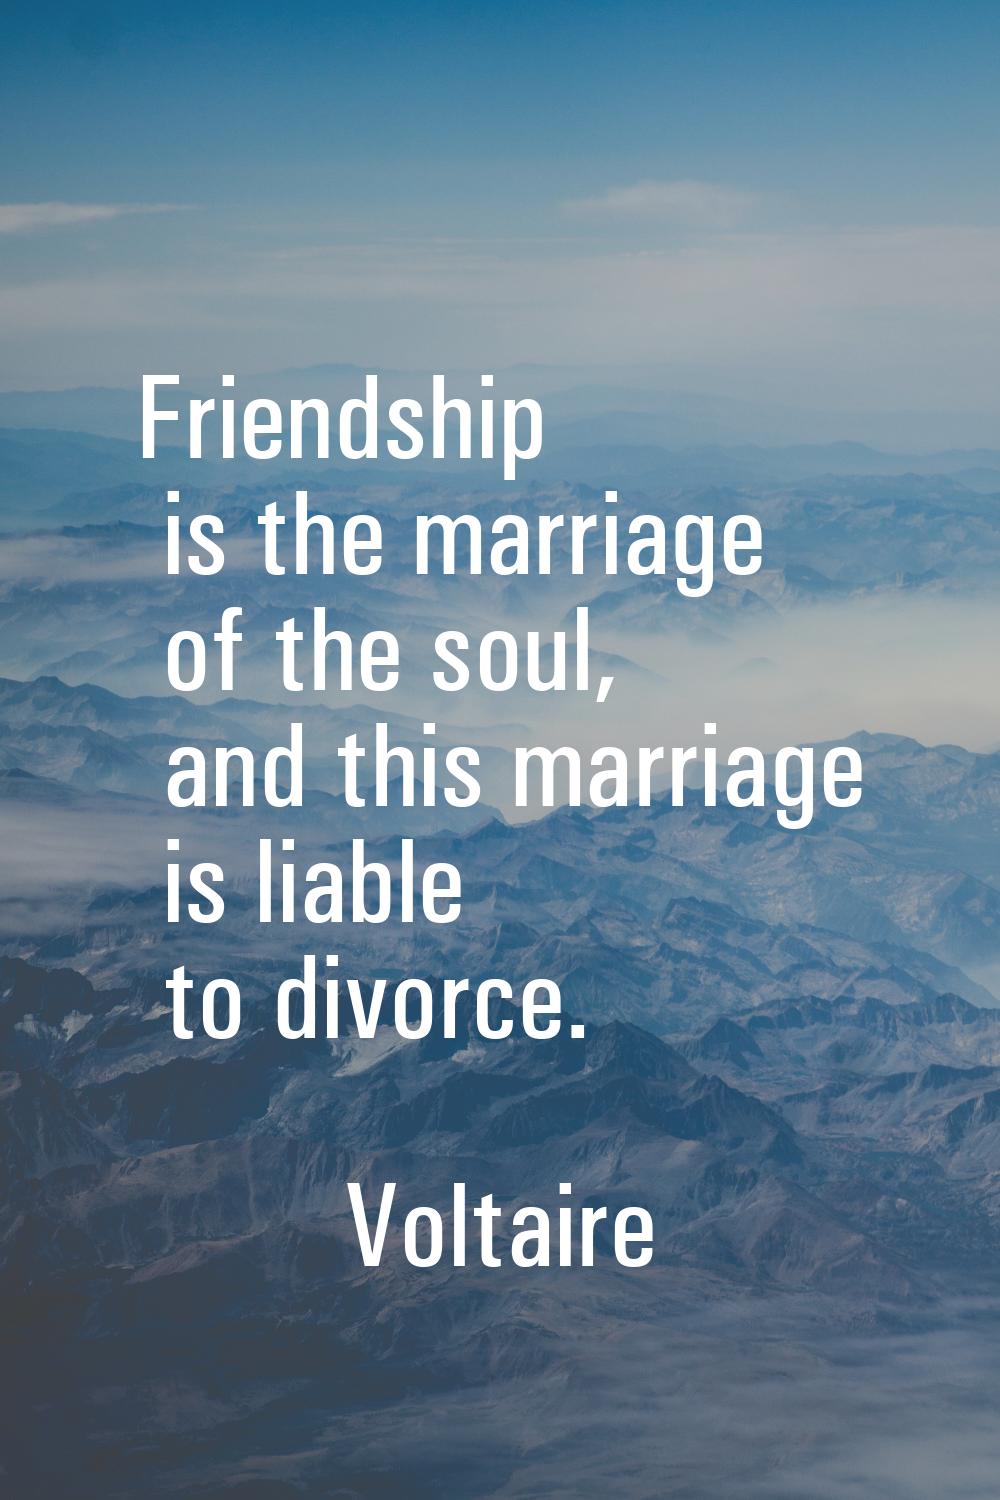 Friendship is the marriage of the soul, and this marriage is liable to divorce.